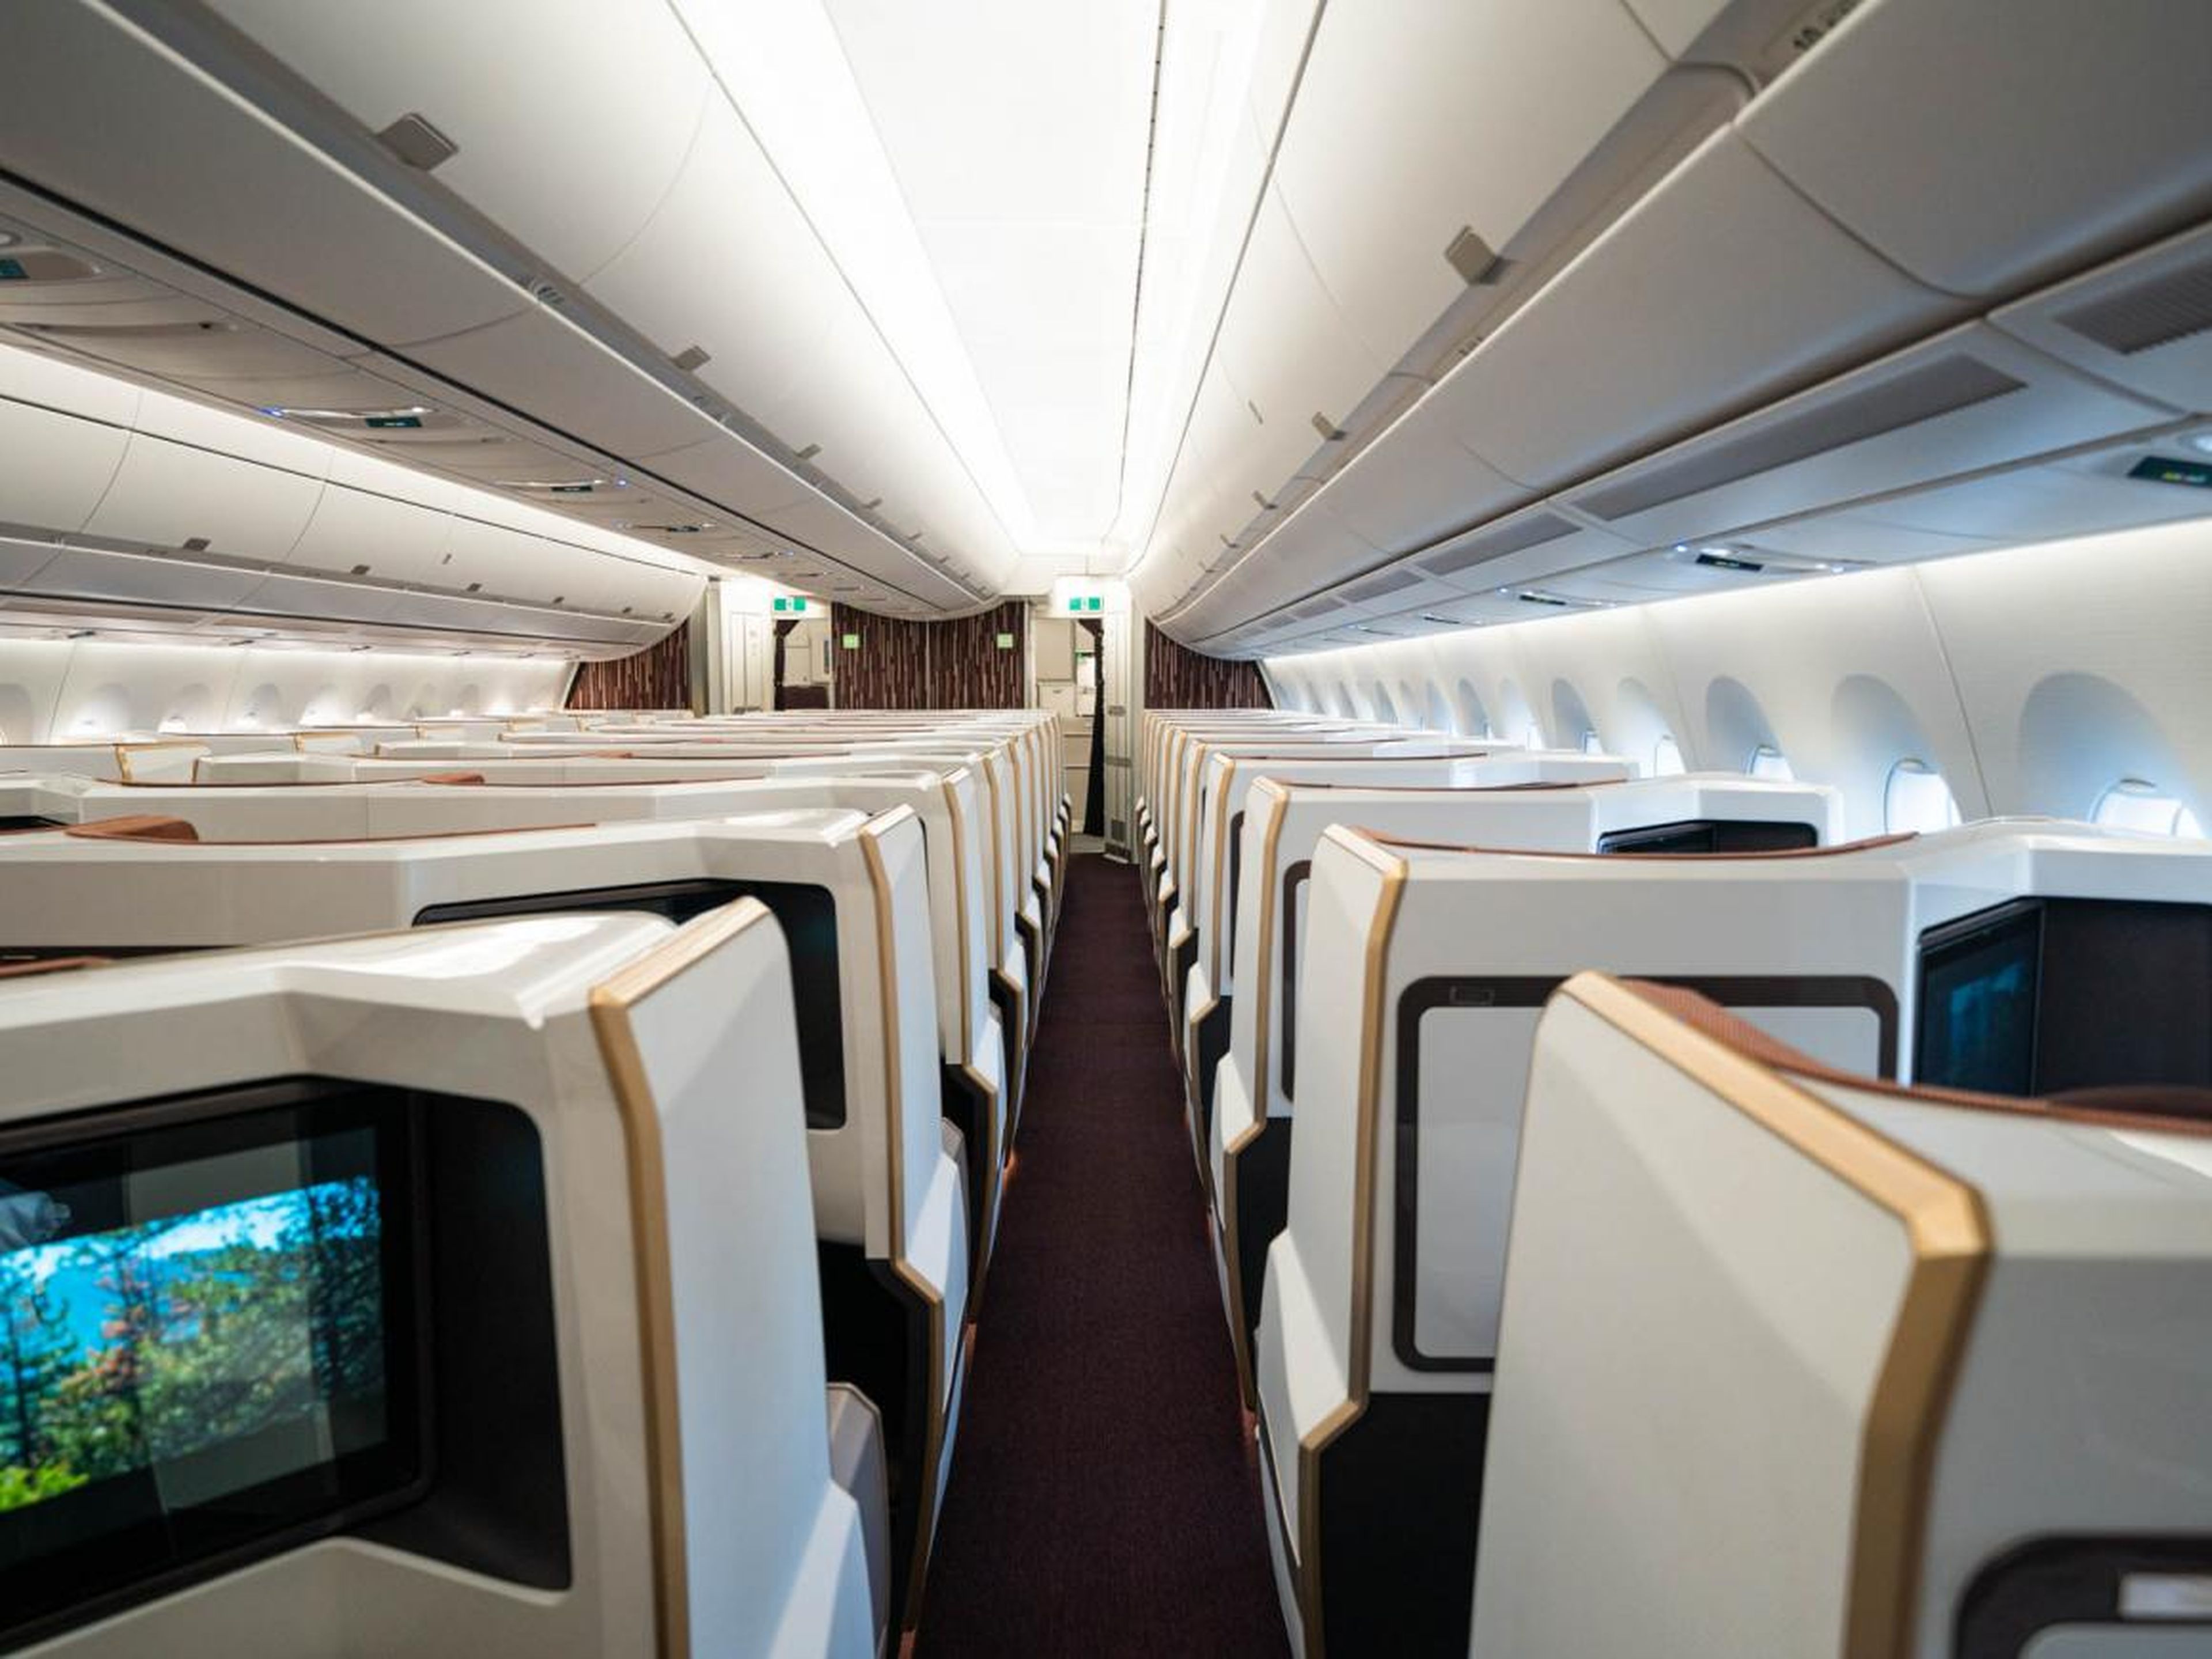 A widebody airliner interior.